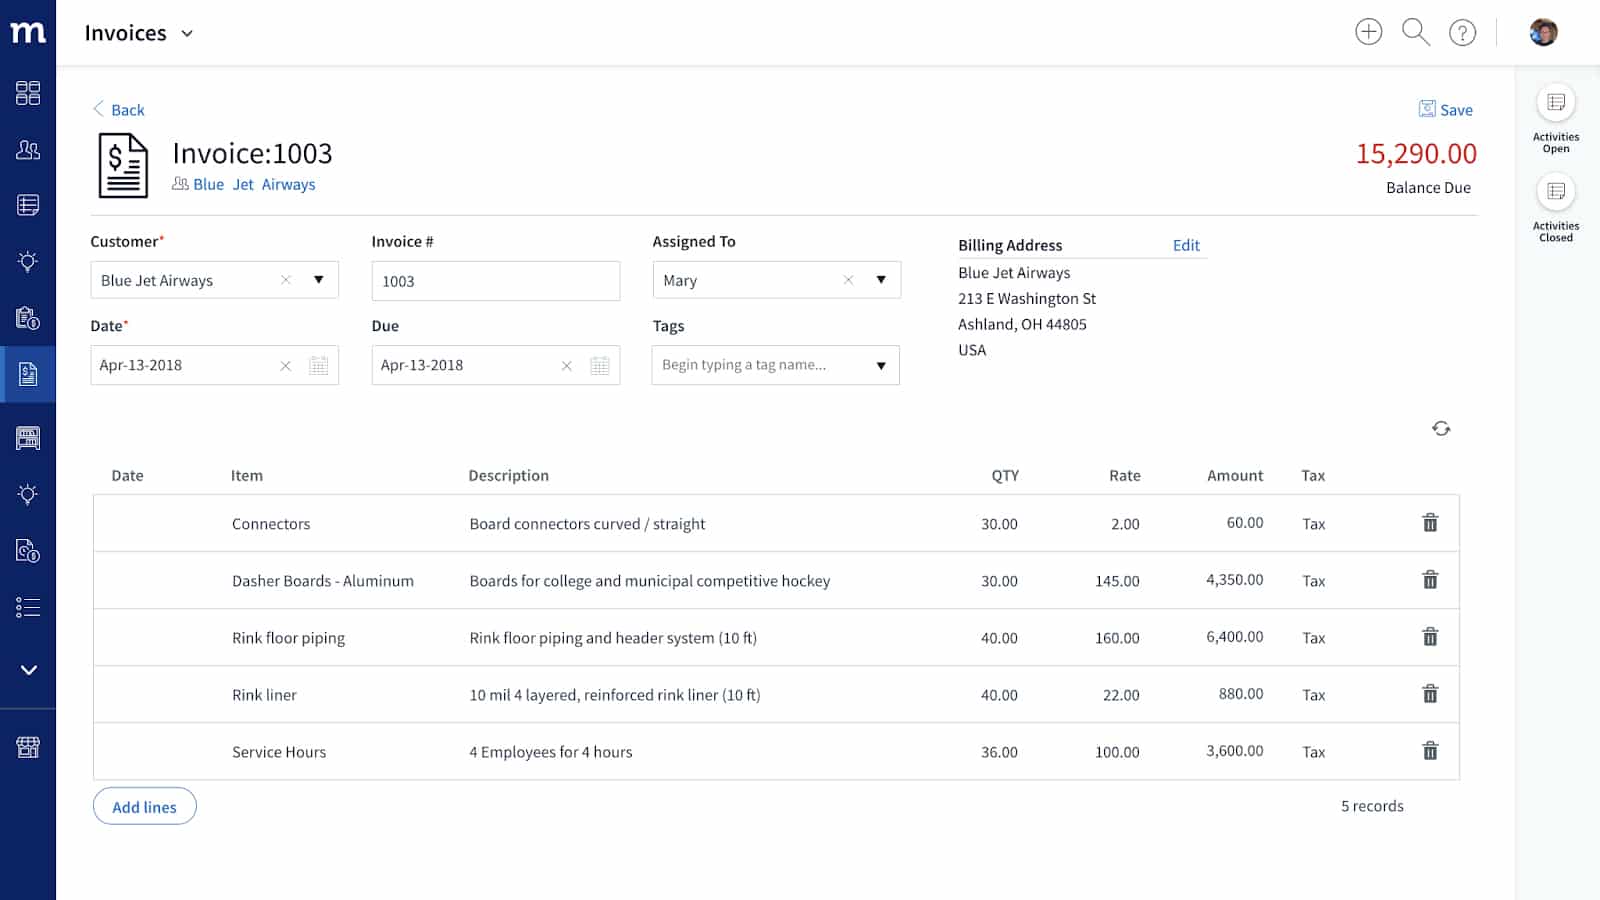 A sample invoice and details from Method CRM.